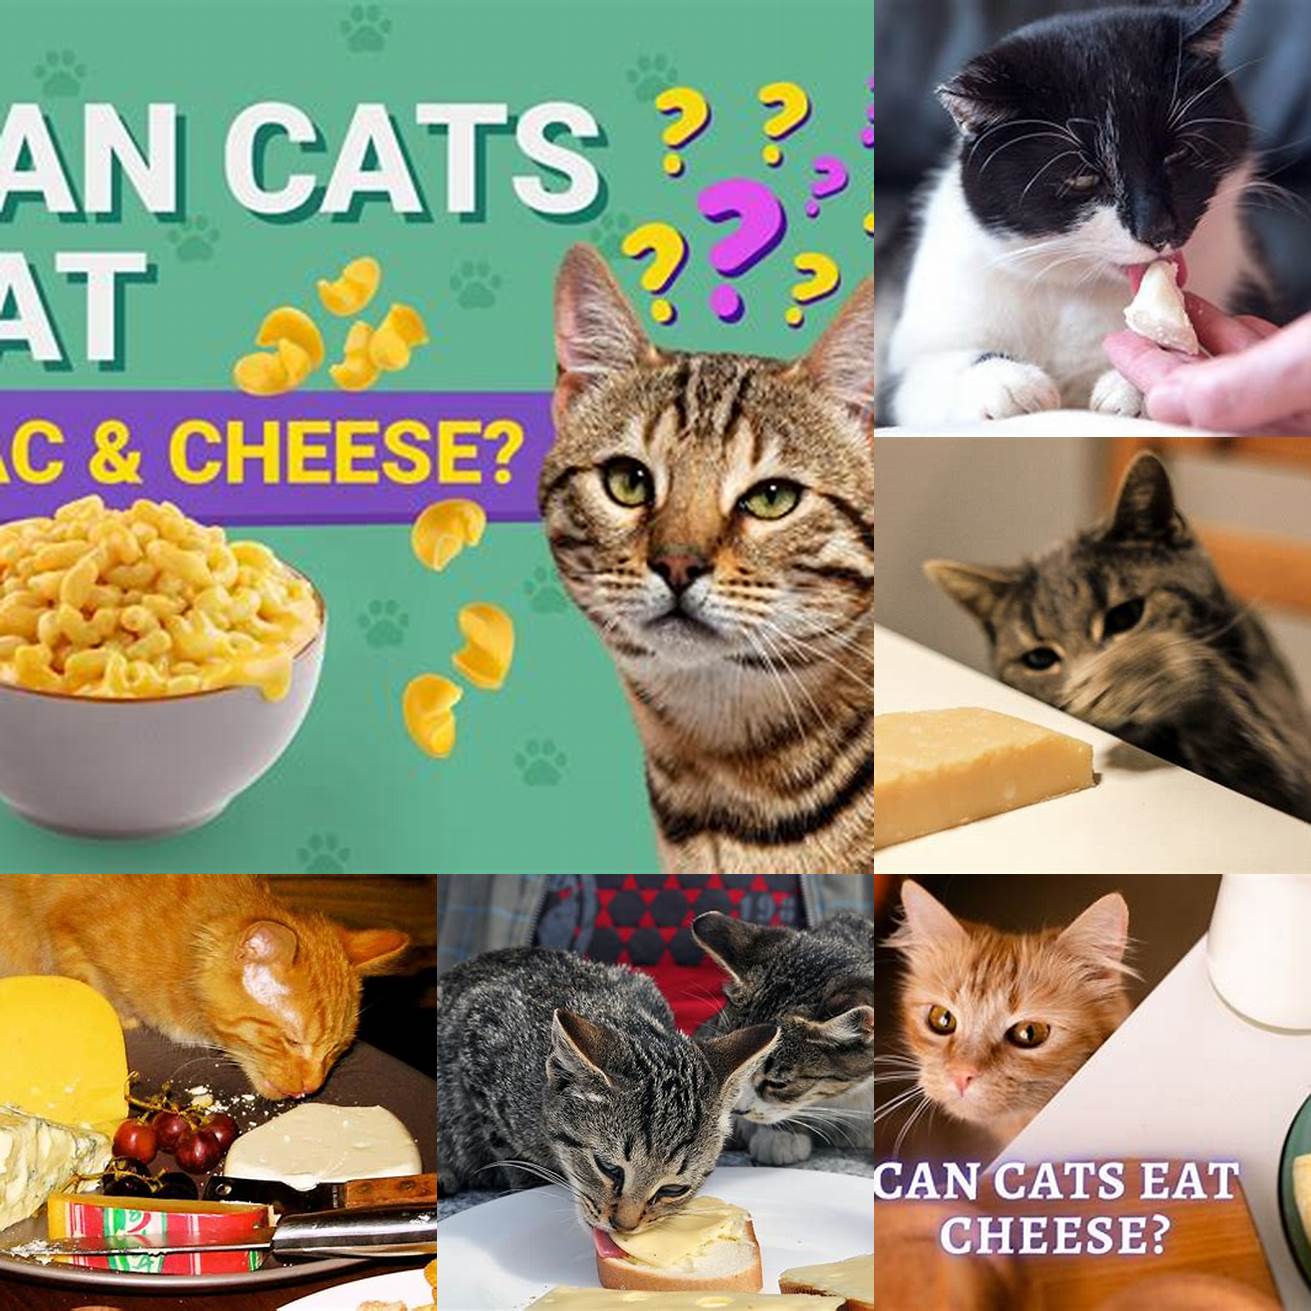 Q Can cats eat cheese